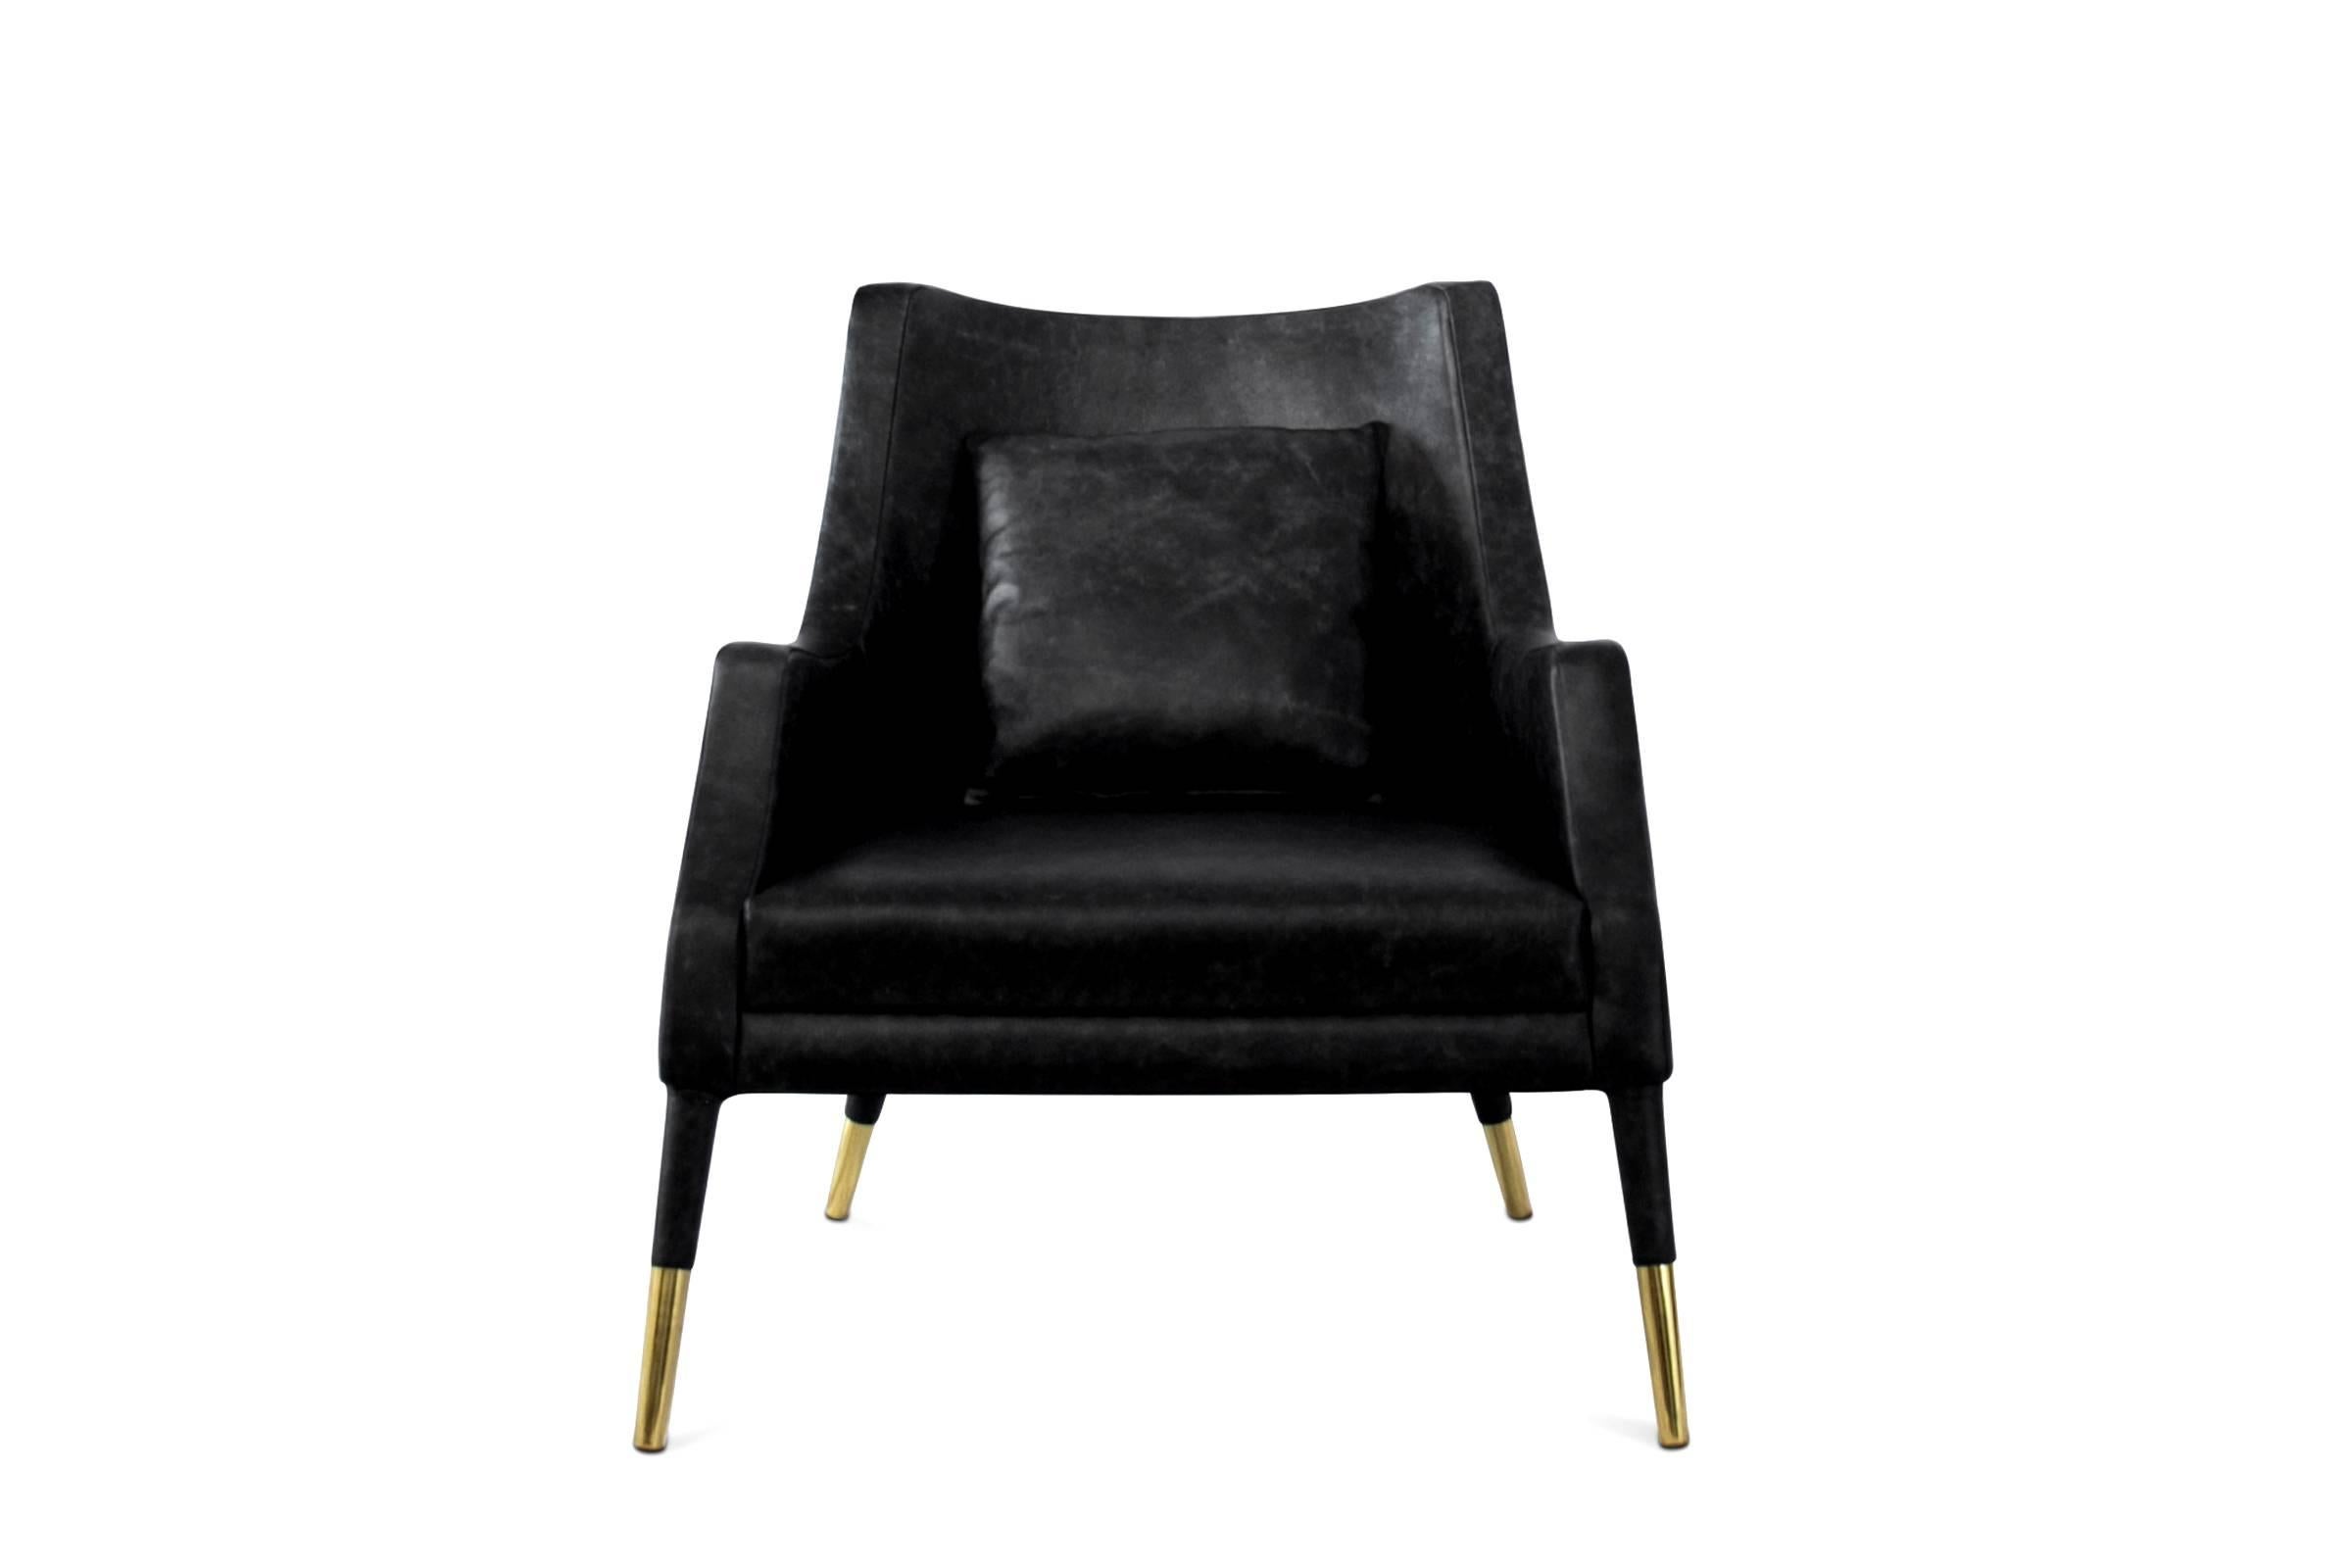 Armchair black lounge with wood structure, upholstered
and covered with black genuine matte leather Grade A.
With in solid brass in polished finish. Cushion included. 
